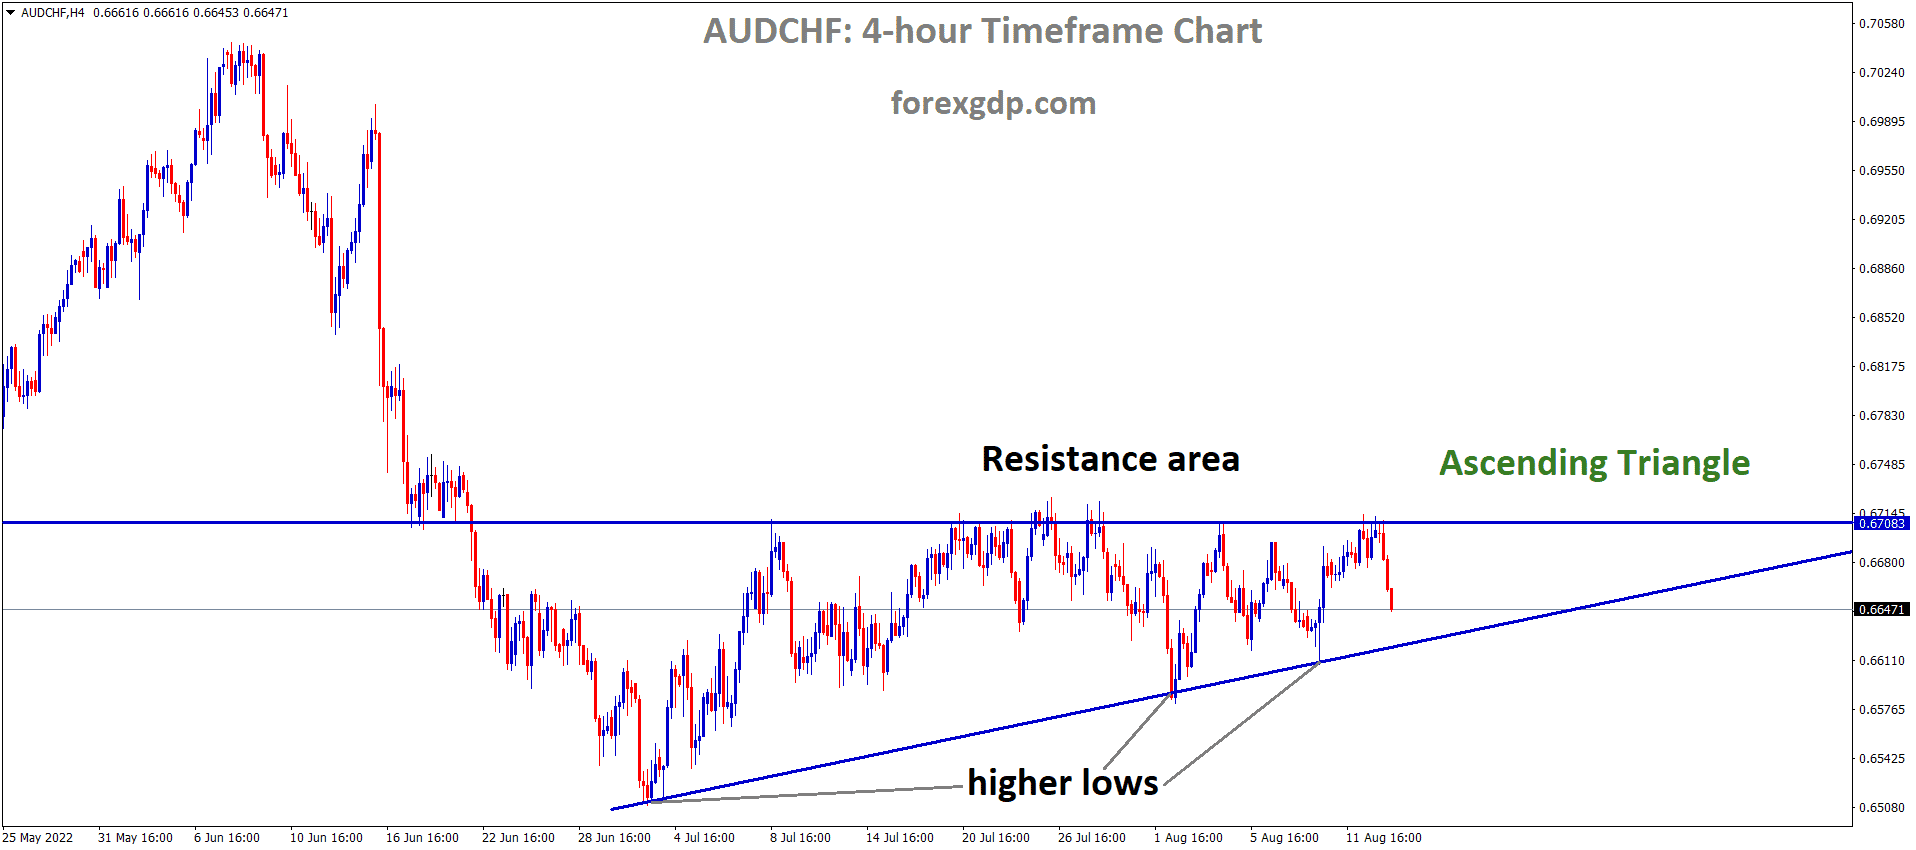 AUDCHF is moving in an Ascending channel and the Market has fallen from the Horizontal resistance area of the Pattern